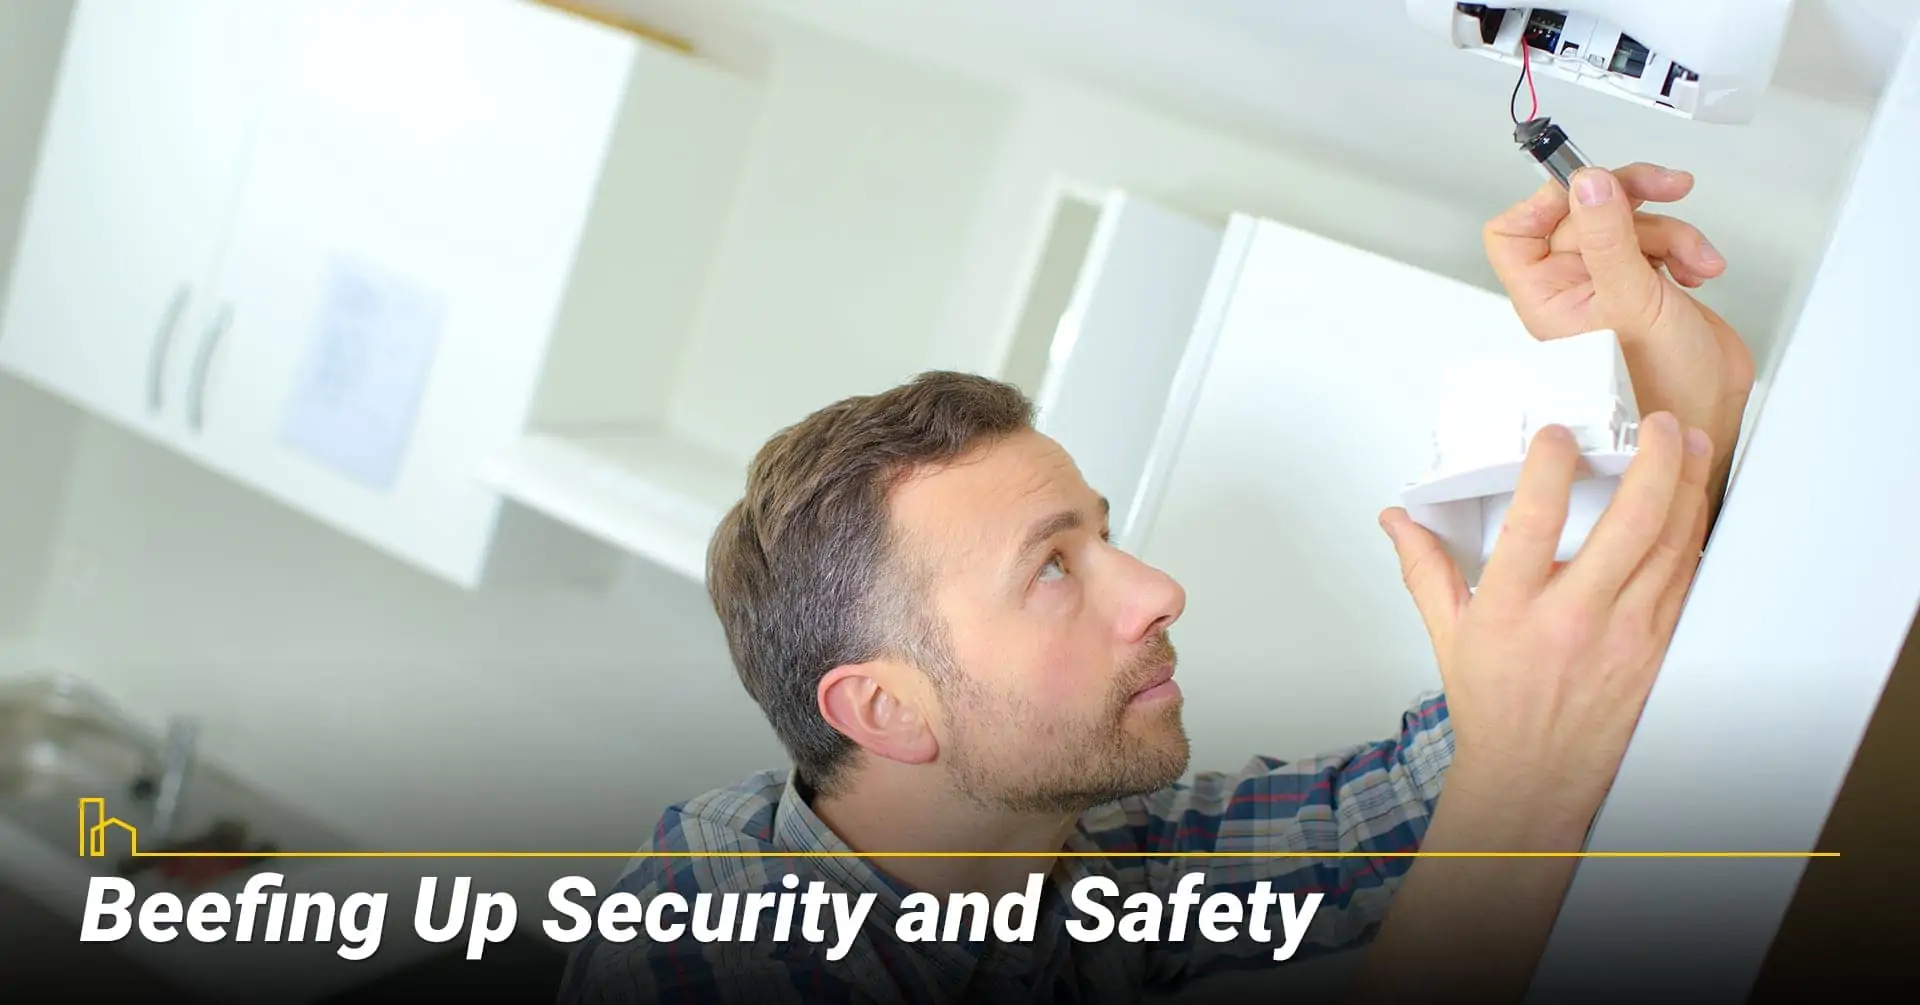 Beefing Up Security and Safety, check all safety systems around the house